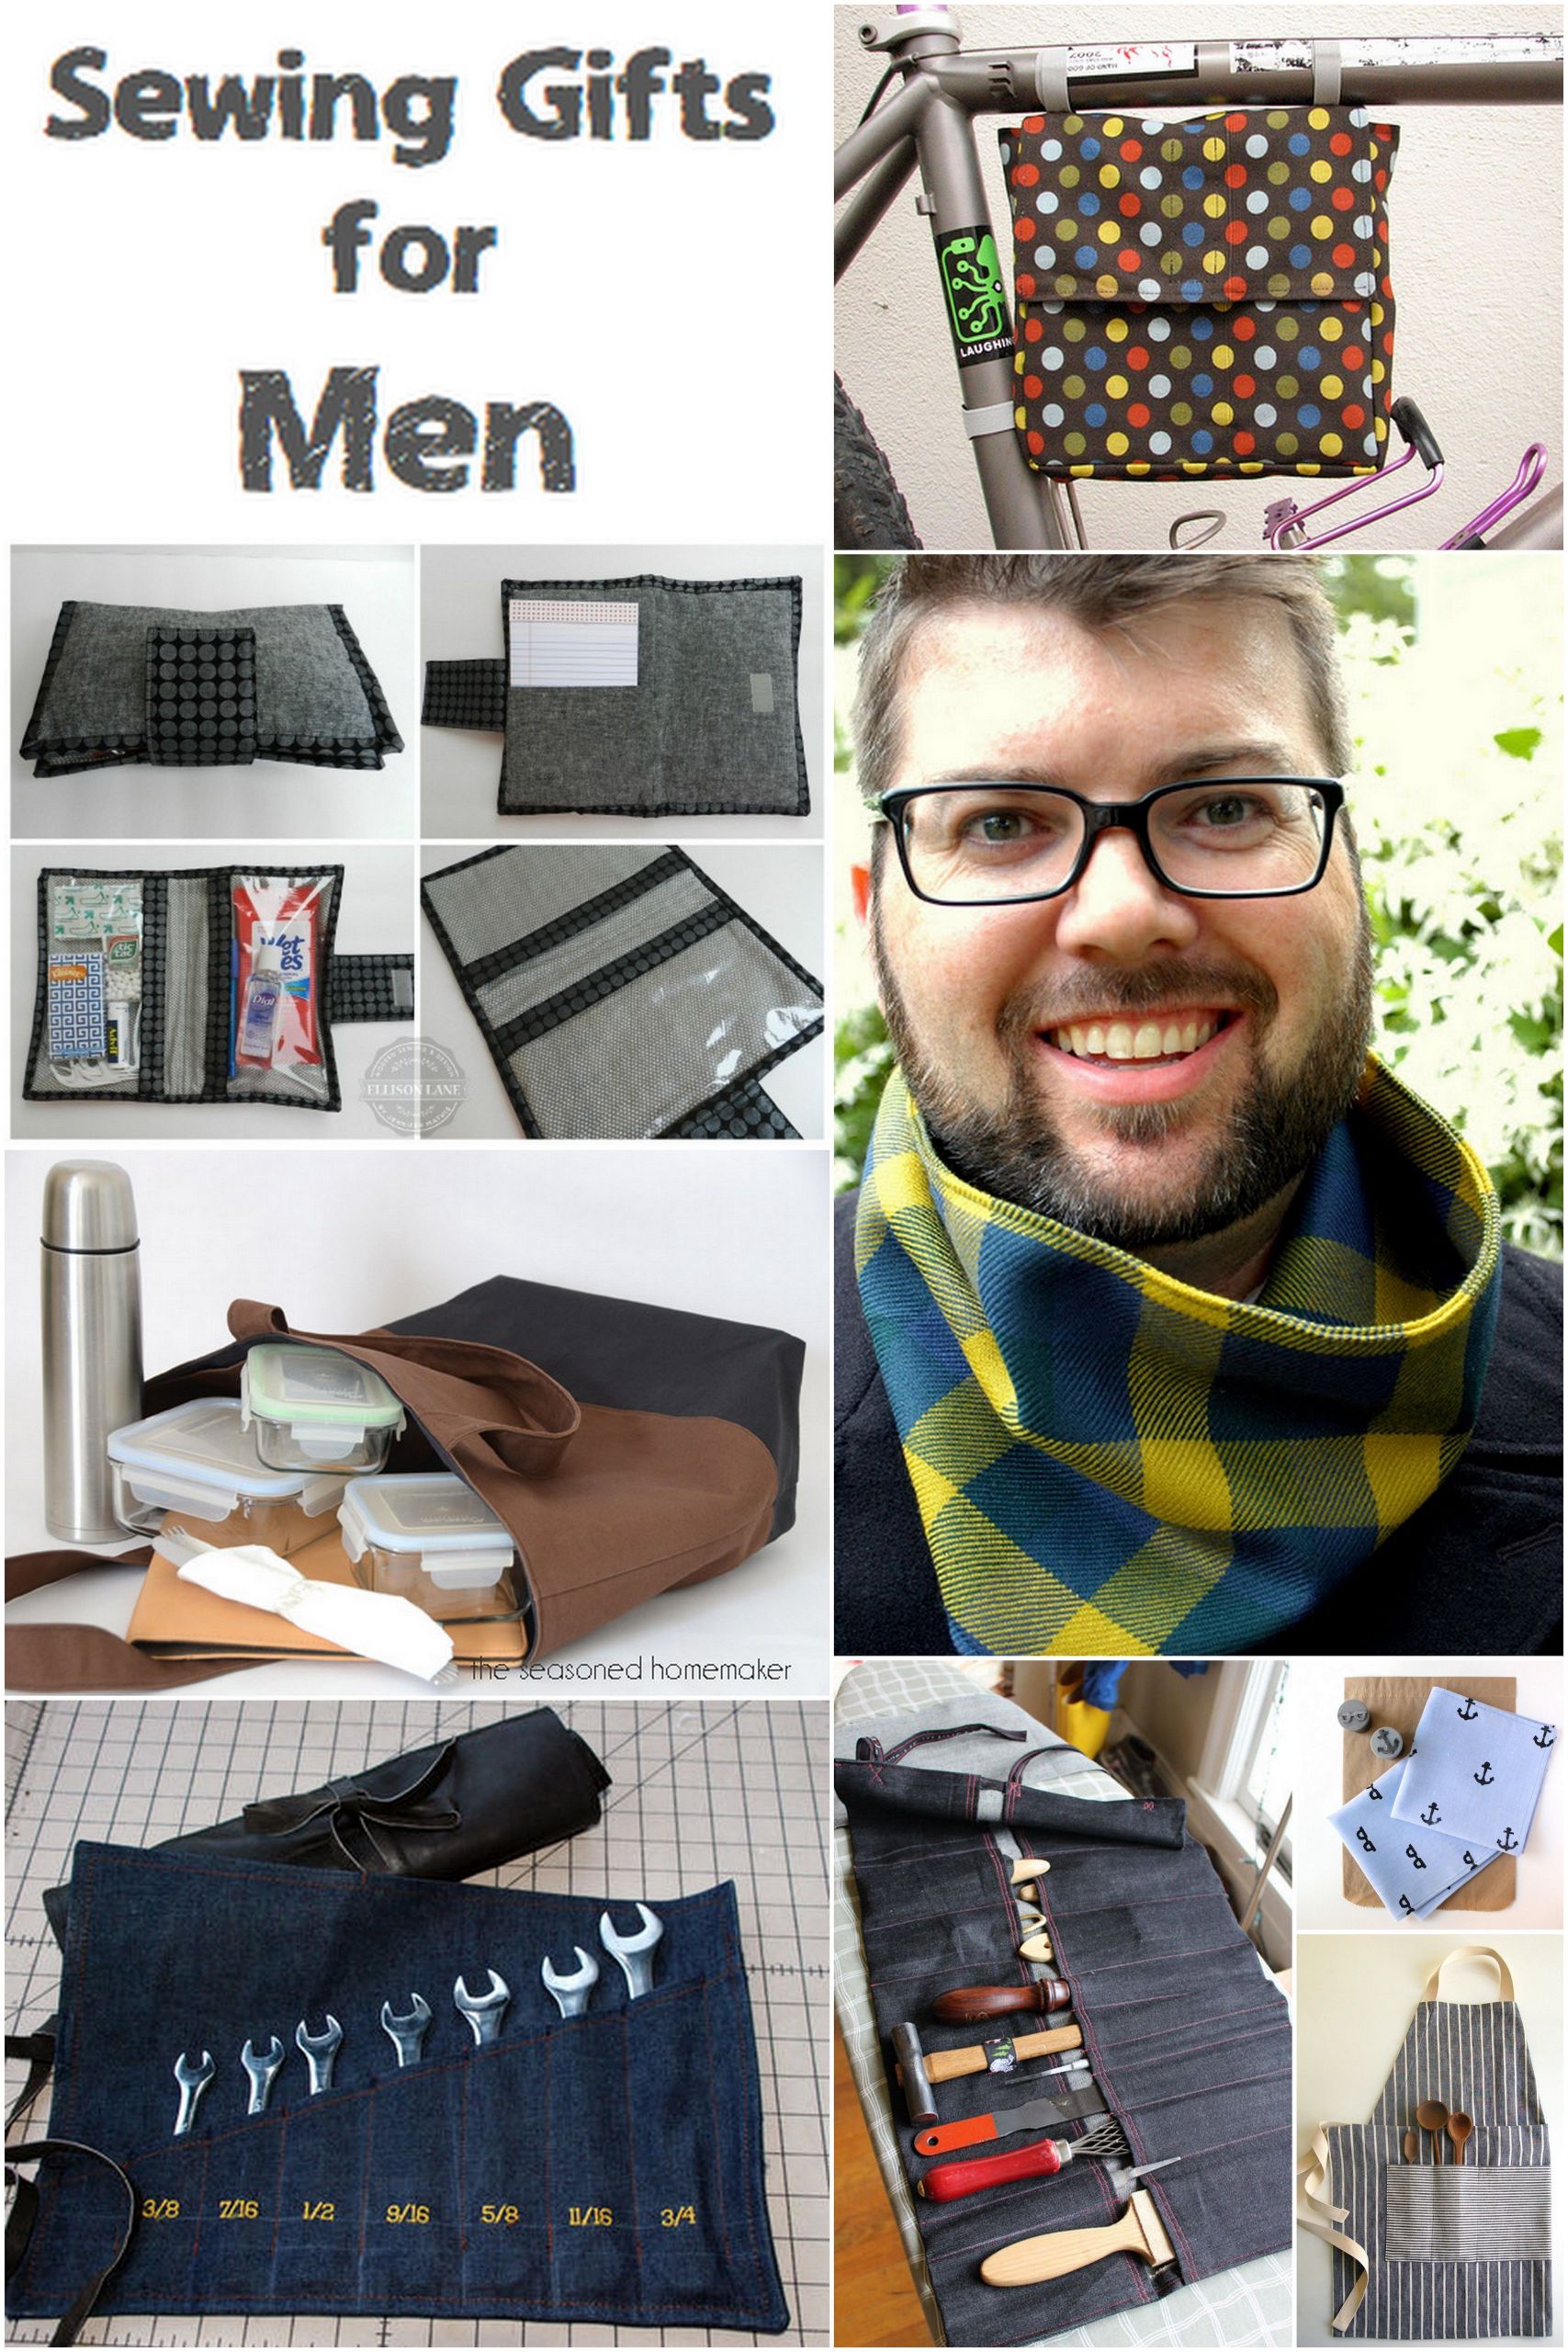 Gifts To Sew For Men
 Sewing Gifts for Men Looking for something to sew for a